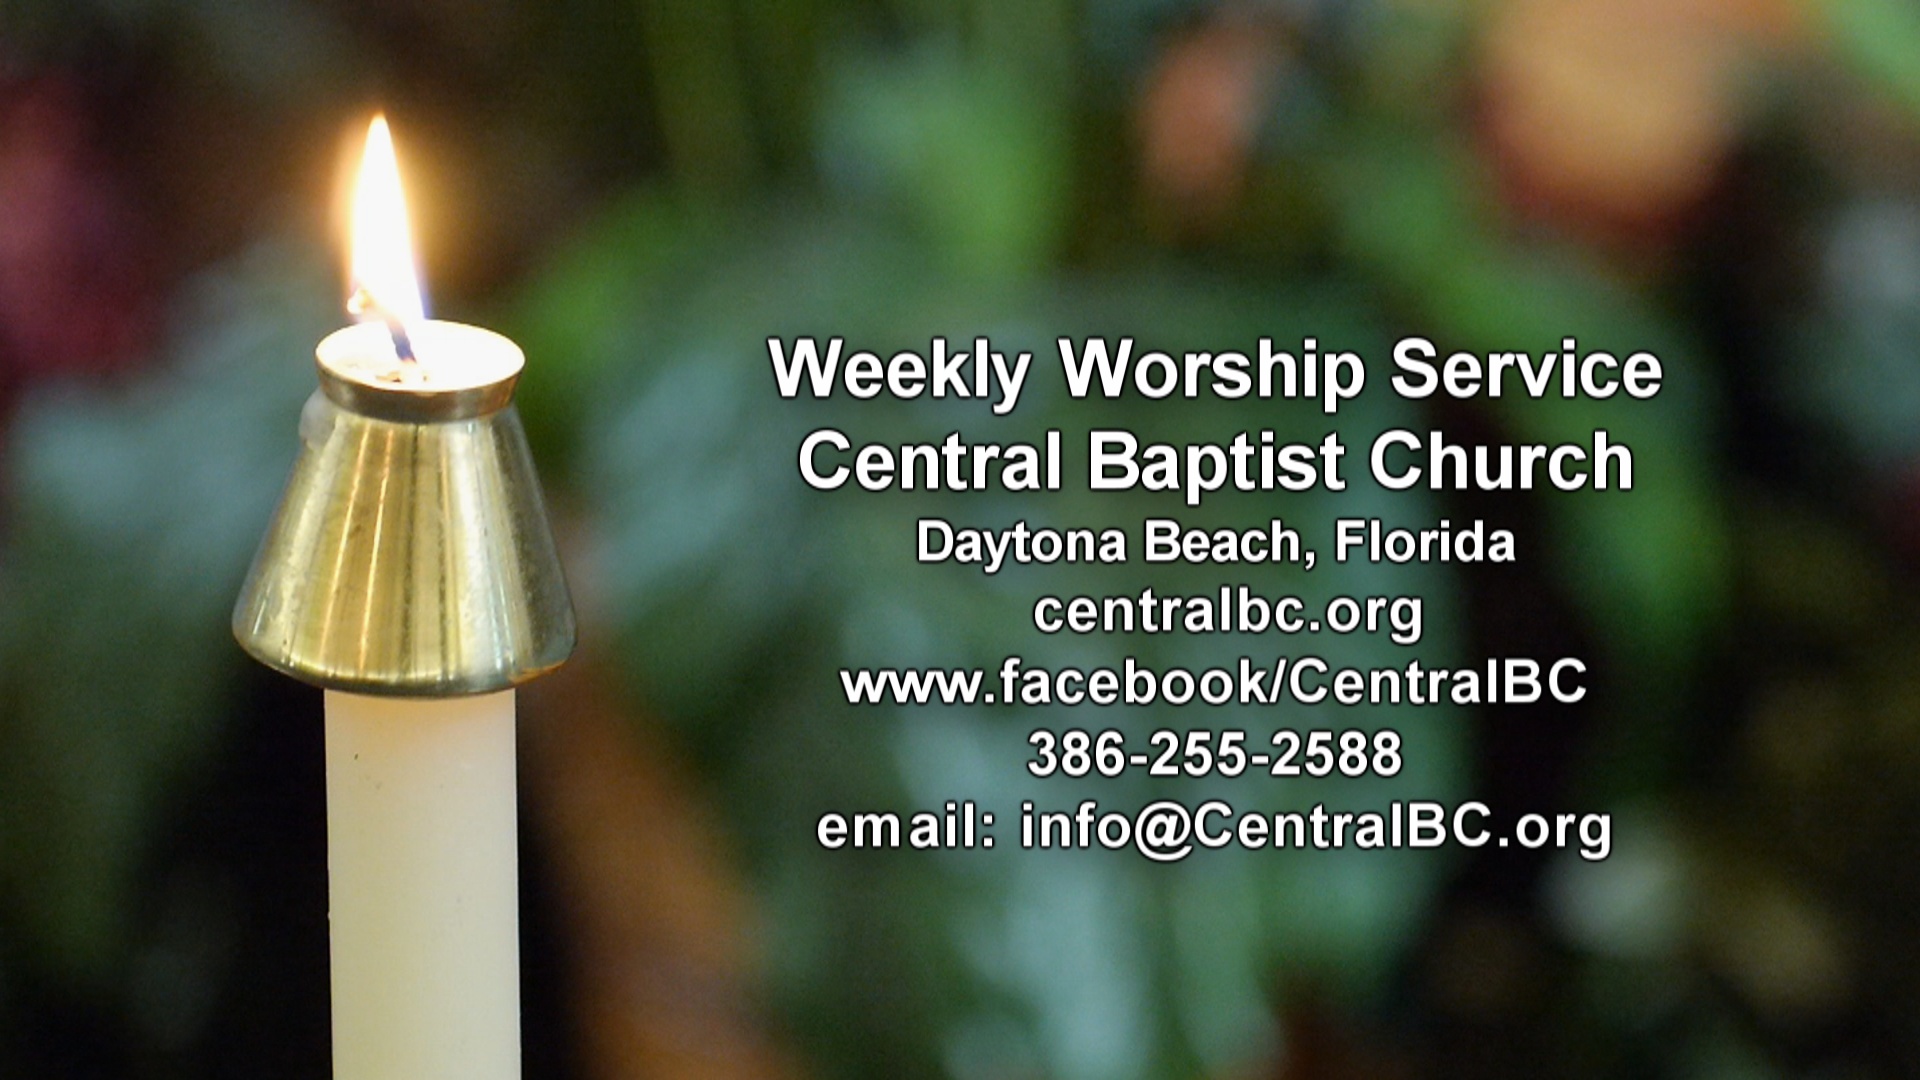 Link to Previous Worship Services on YouTube During the Pandemic